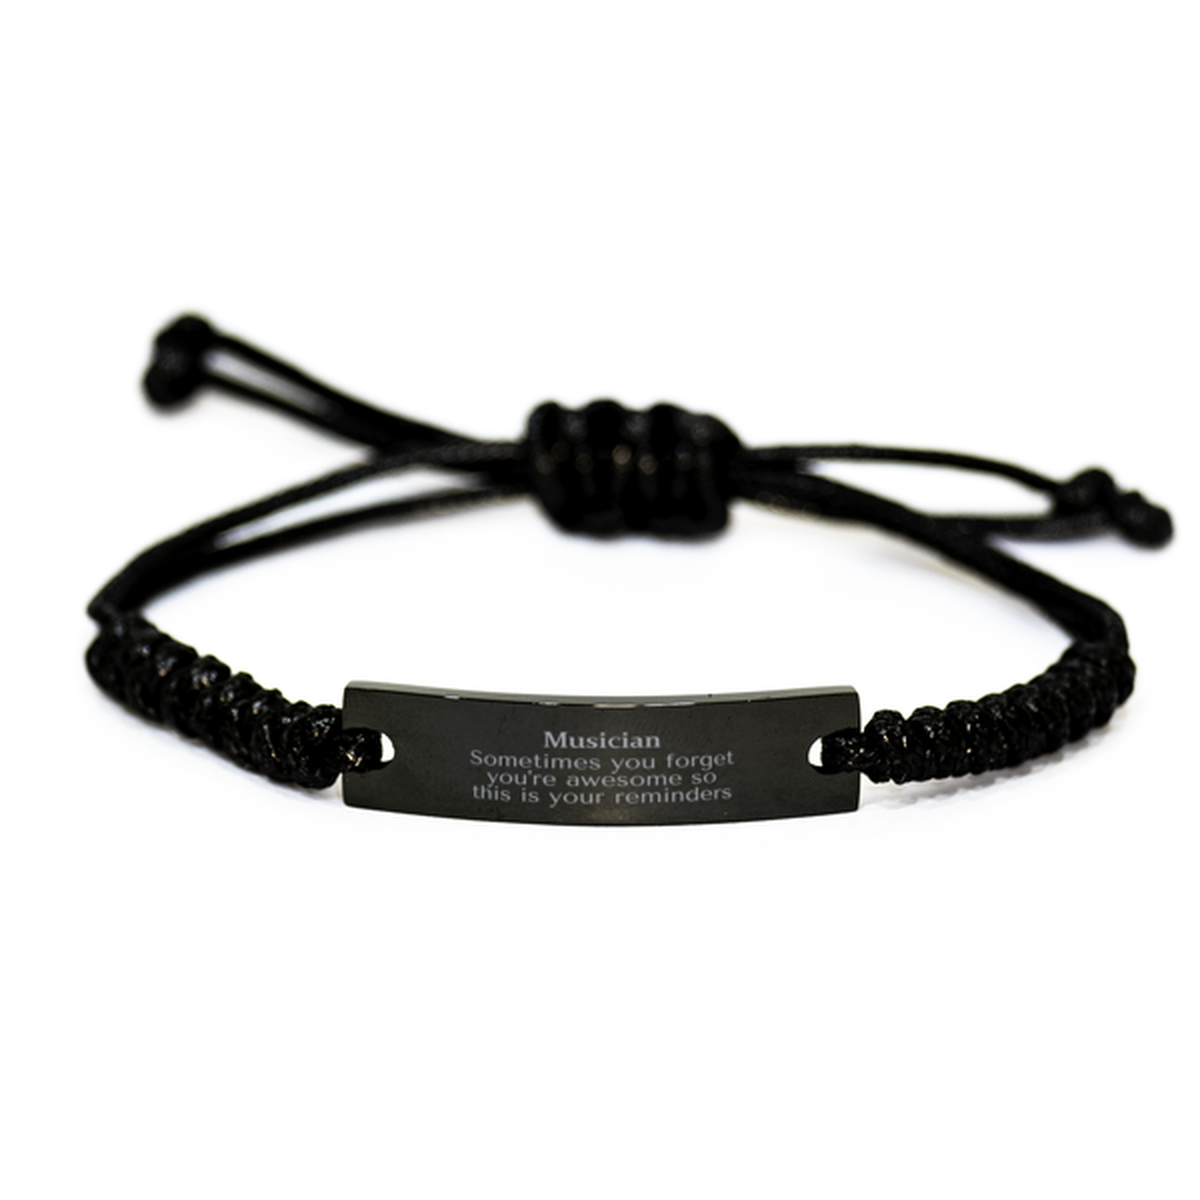 Sentimental Musician Black Rope Bracelet, Musician Sometimes you forget you're awesome so this is your reminders, Graduation Christmas Birthday Gifts for Musician, Men, Women, Coworkers